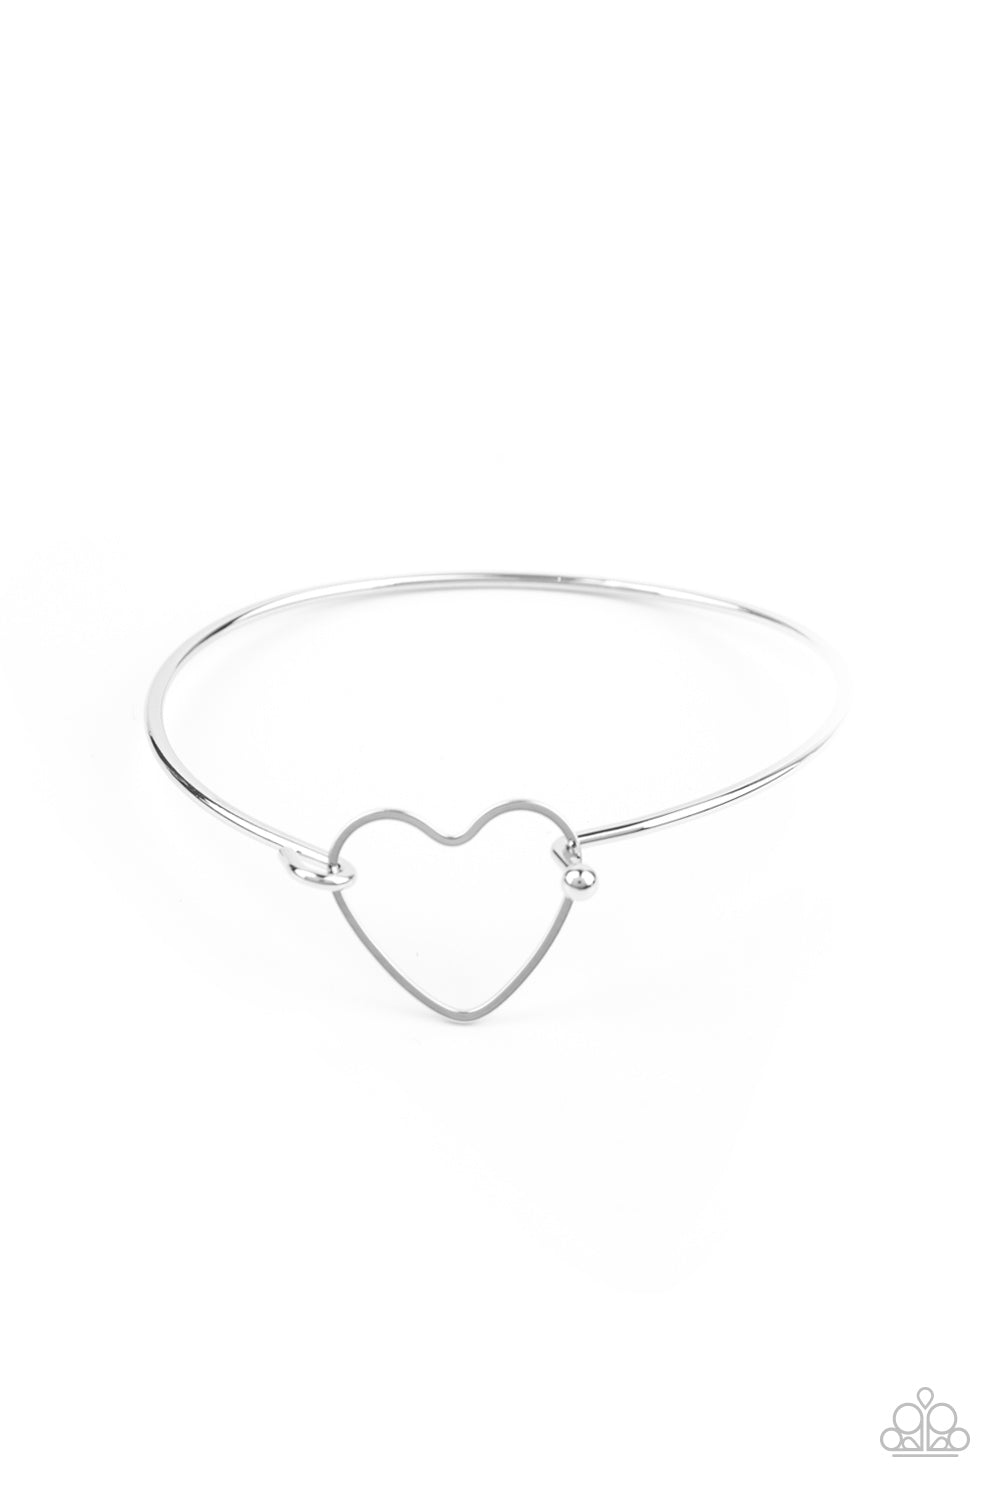 make-yourself-heart-silver-p9wh-svxx-189xx